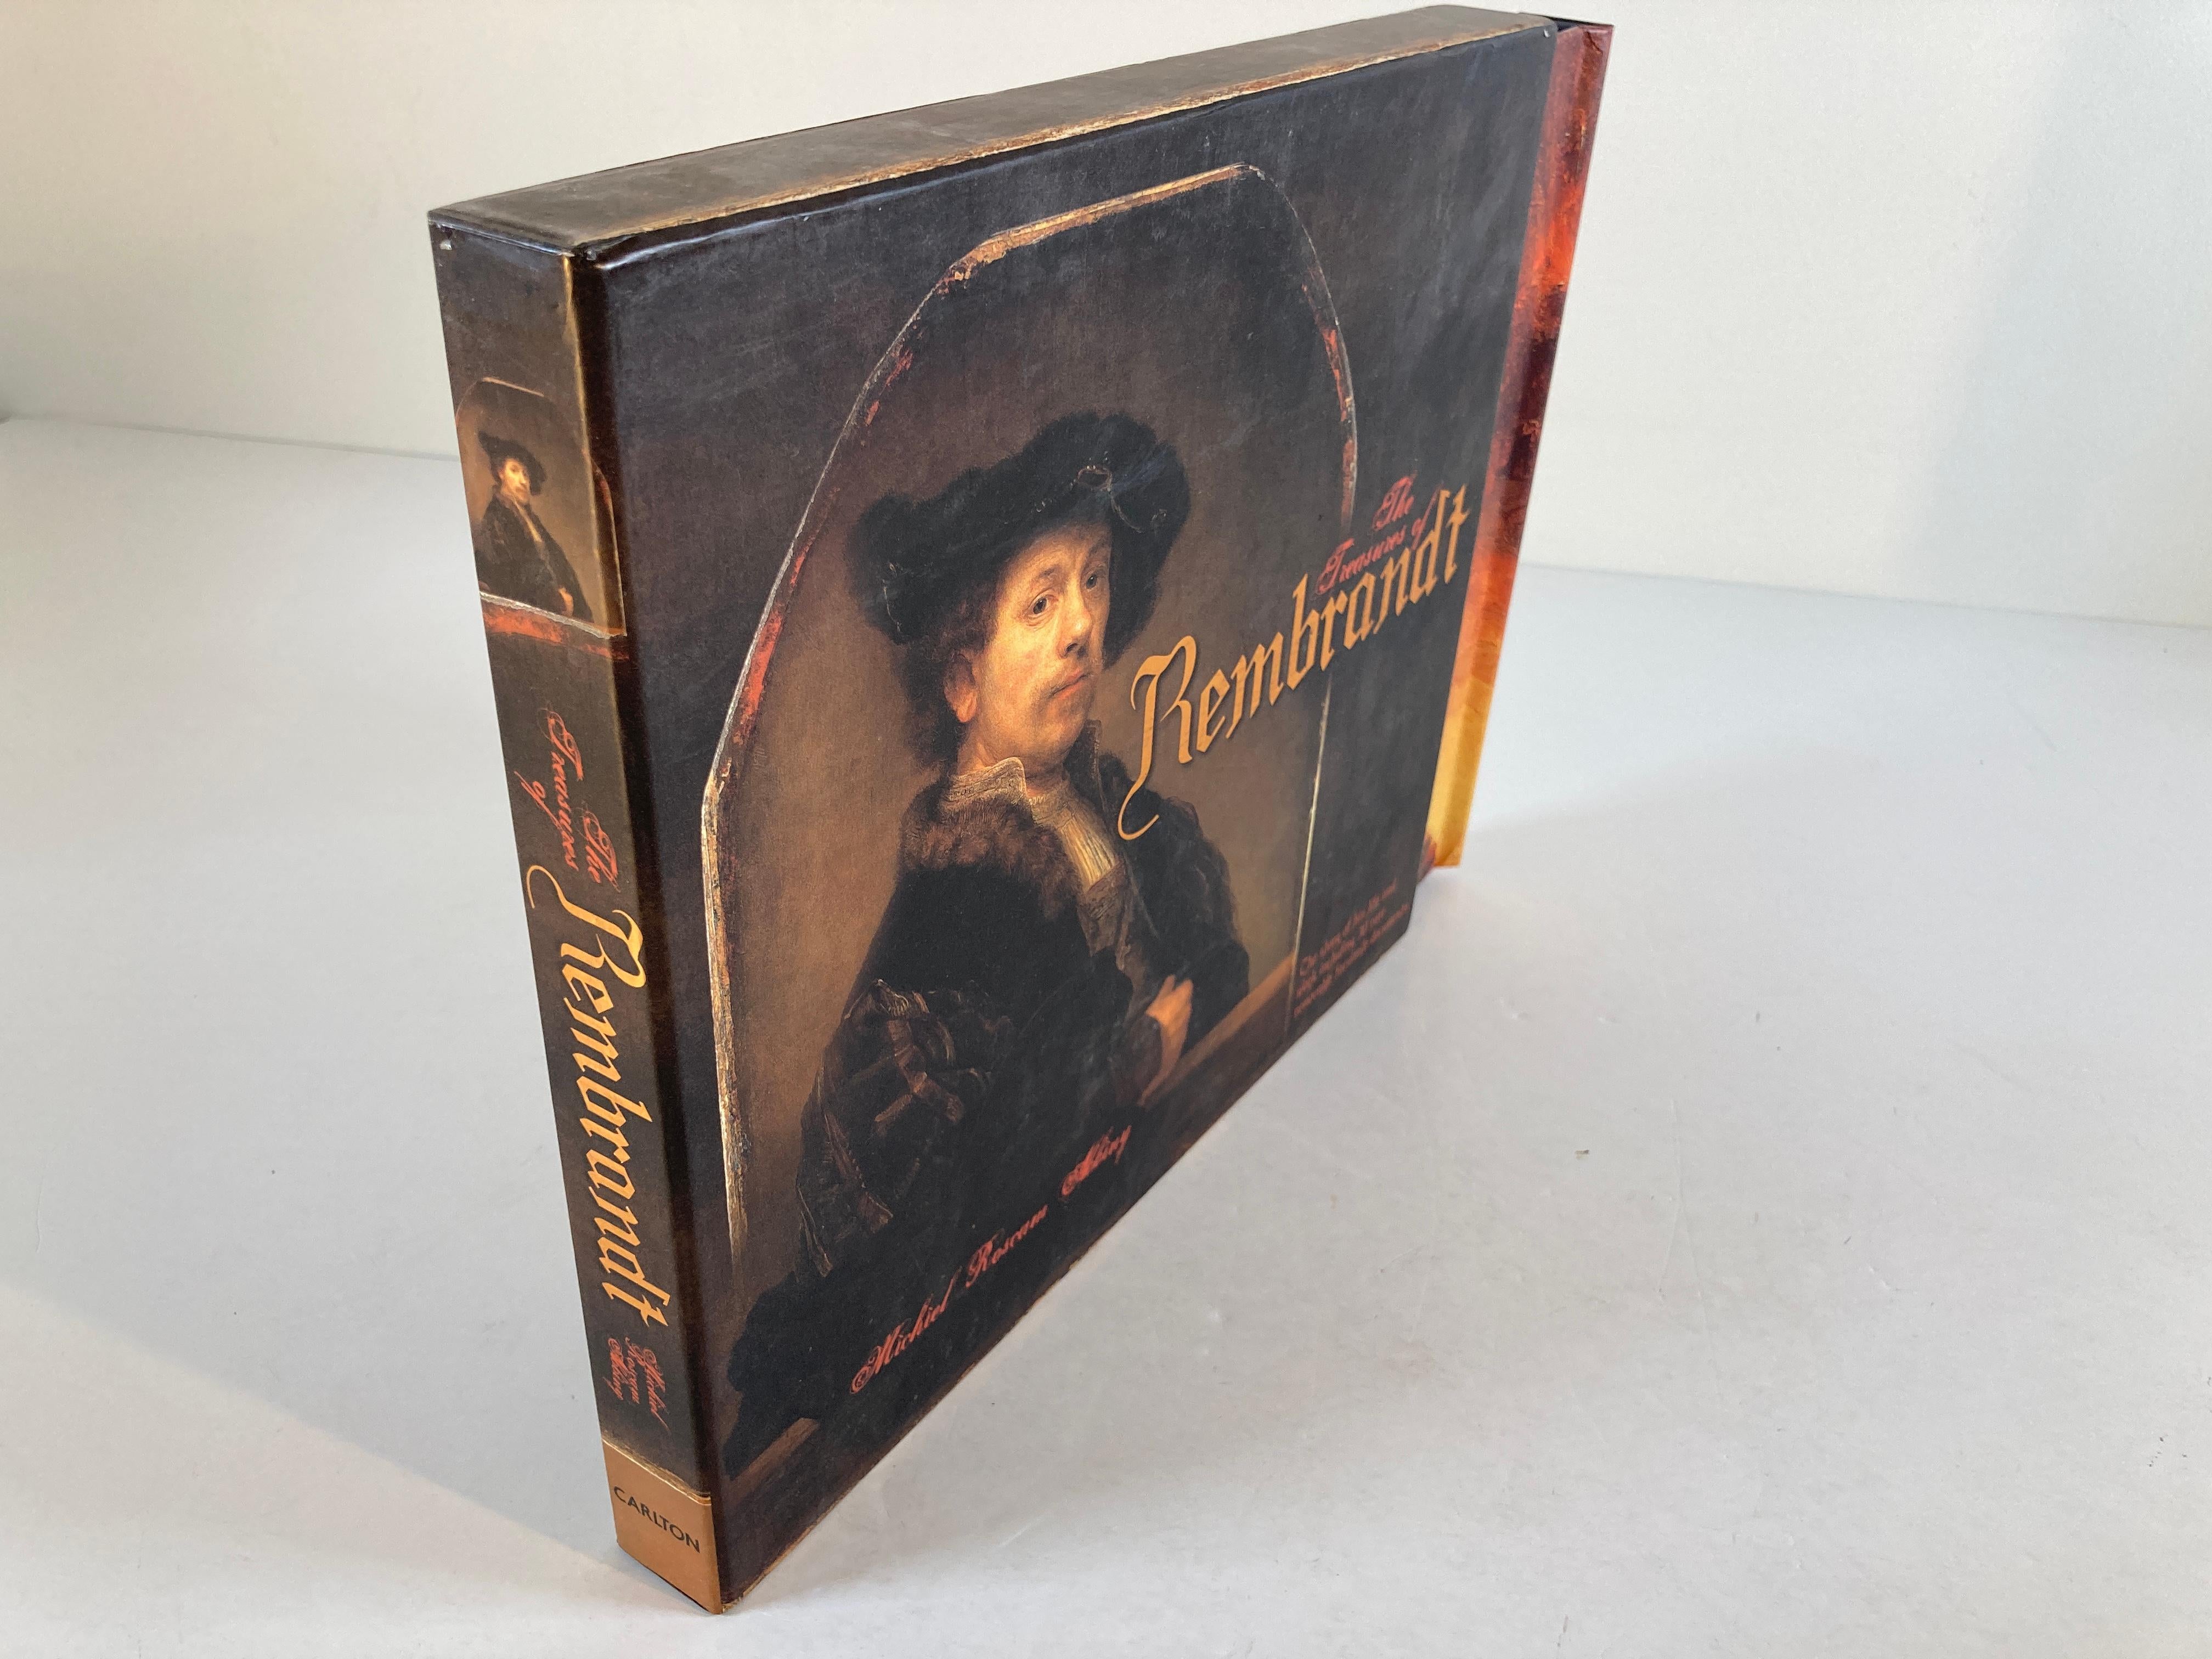 The Treasures of Rembrandt Book by Michiel Roscam Abbing Art Gallery Book in slip case.
Celebrating the 400th anniversary of the birth of one of the world's greatest artists, Rembrandt Harmenzs van Rijn, The Treasures of Rembrandt looks at the many